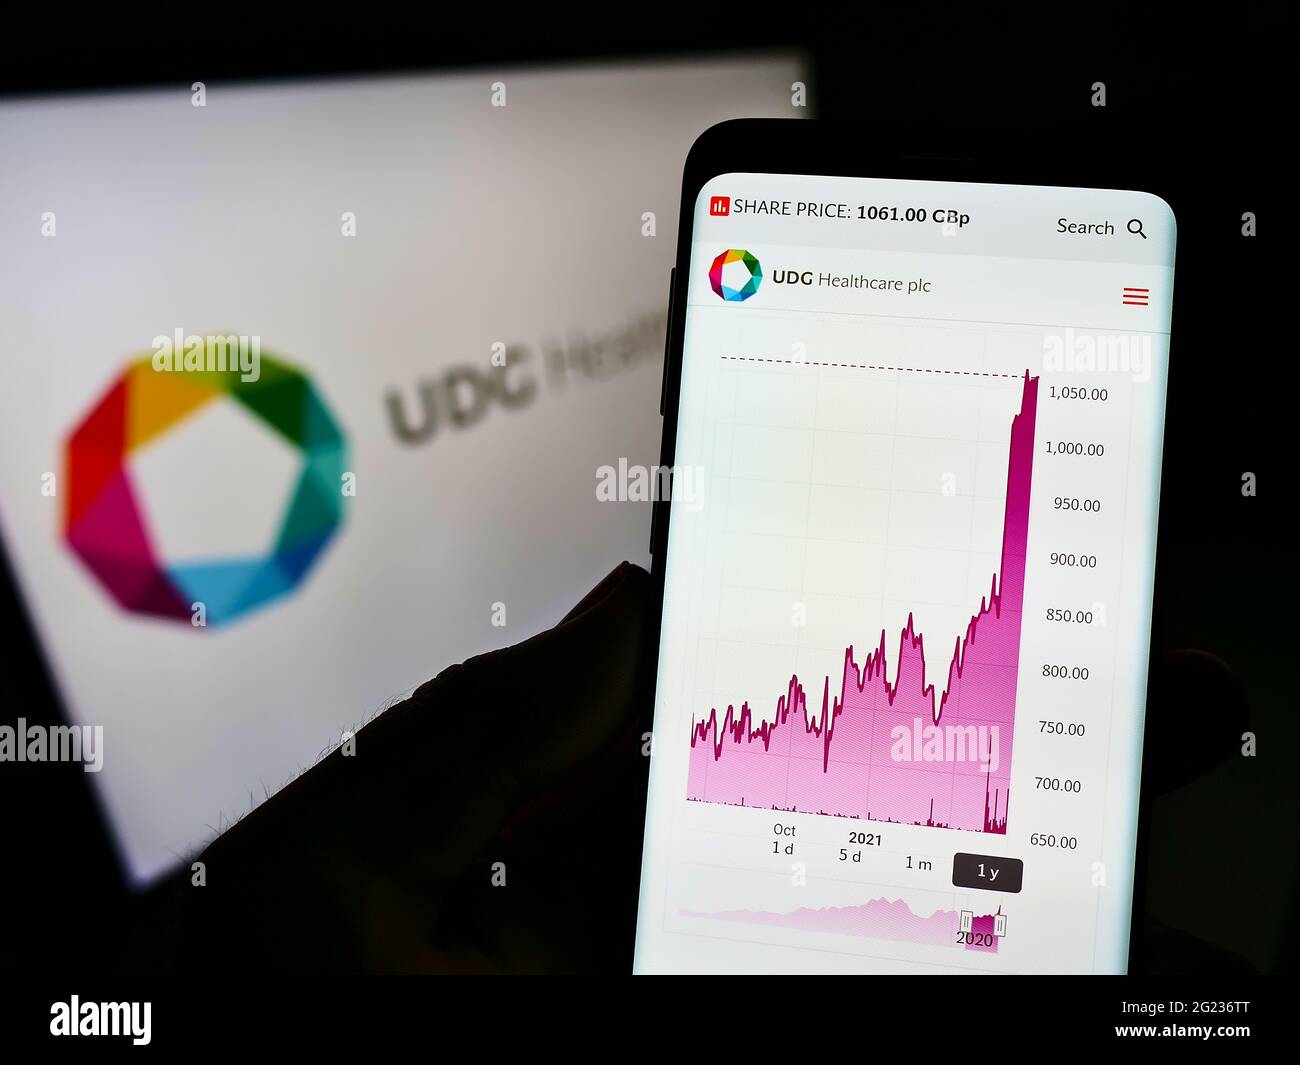 Person holding cellphone with webpage of Irish pharmaceutical company UDG Healthcare plc on screen with logo. Focus on center of phone display. Stock Photo